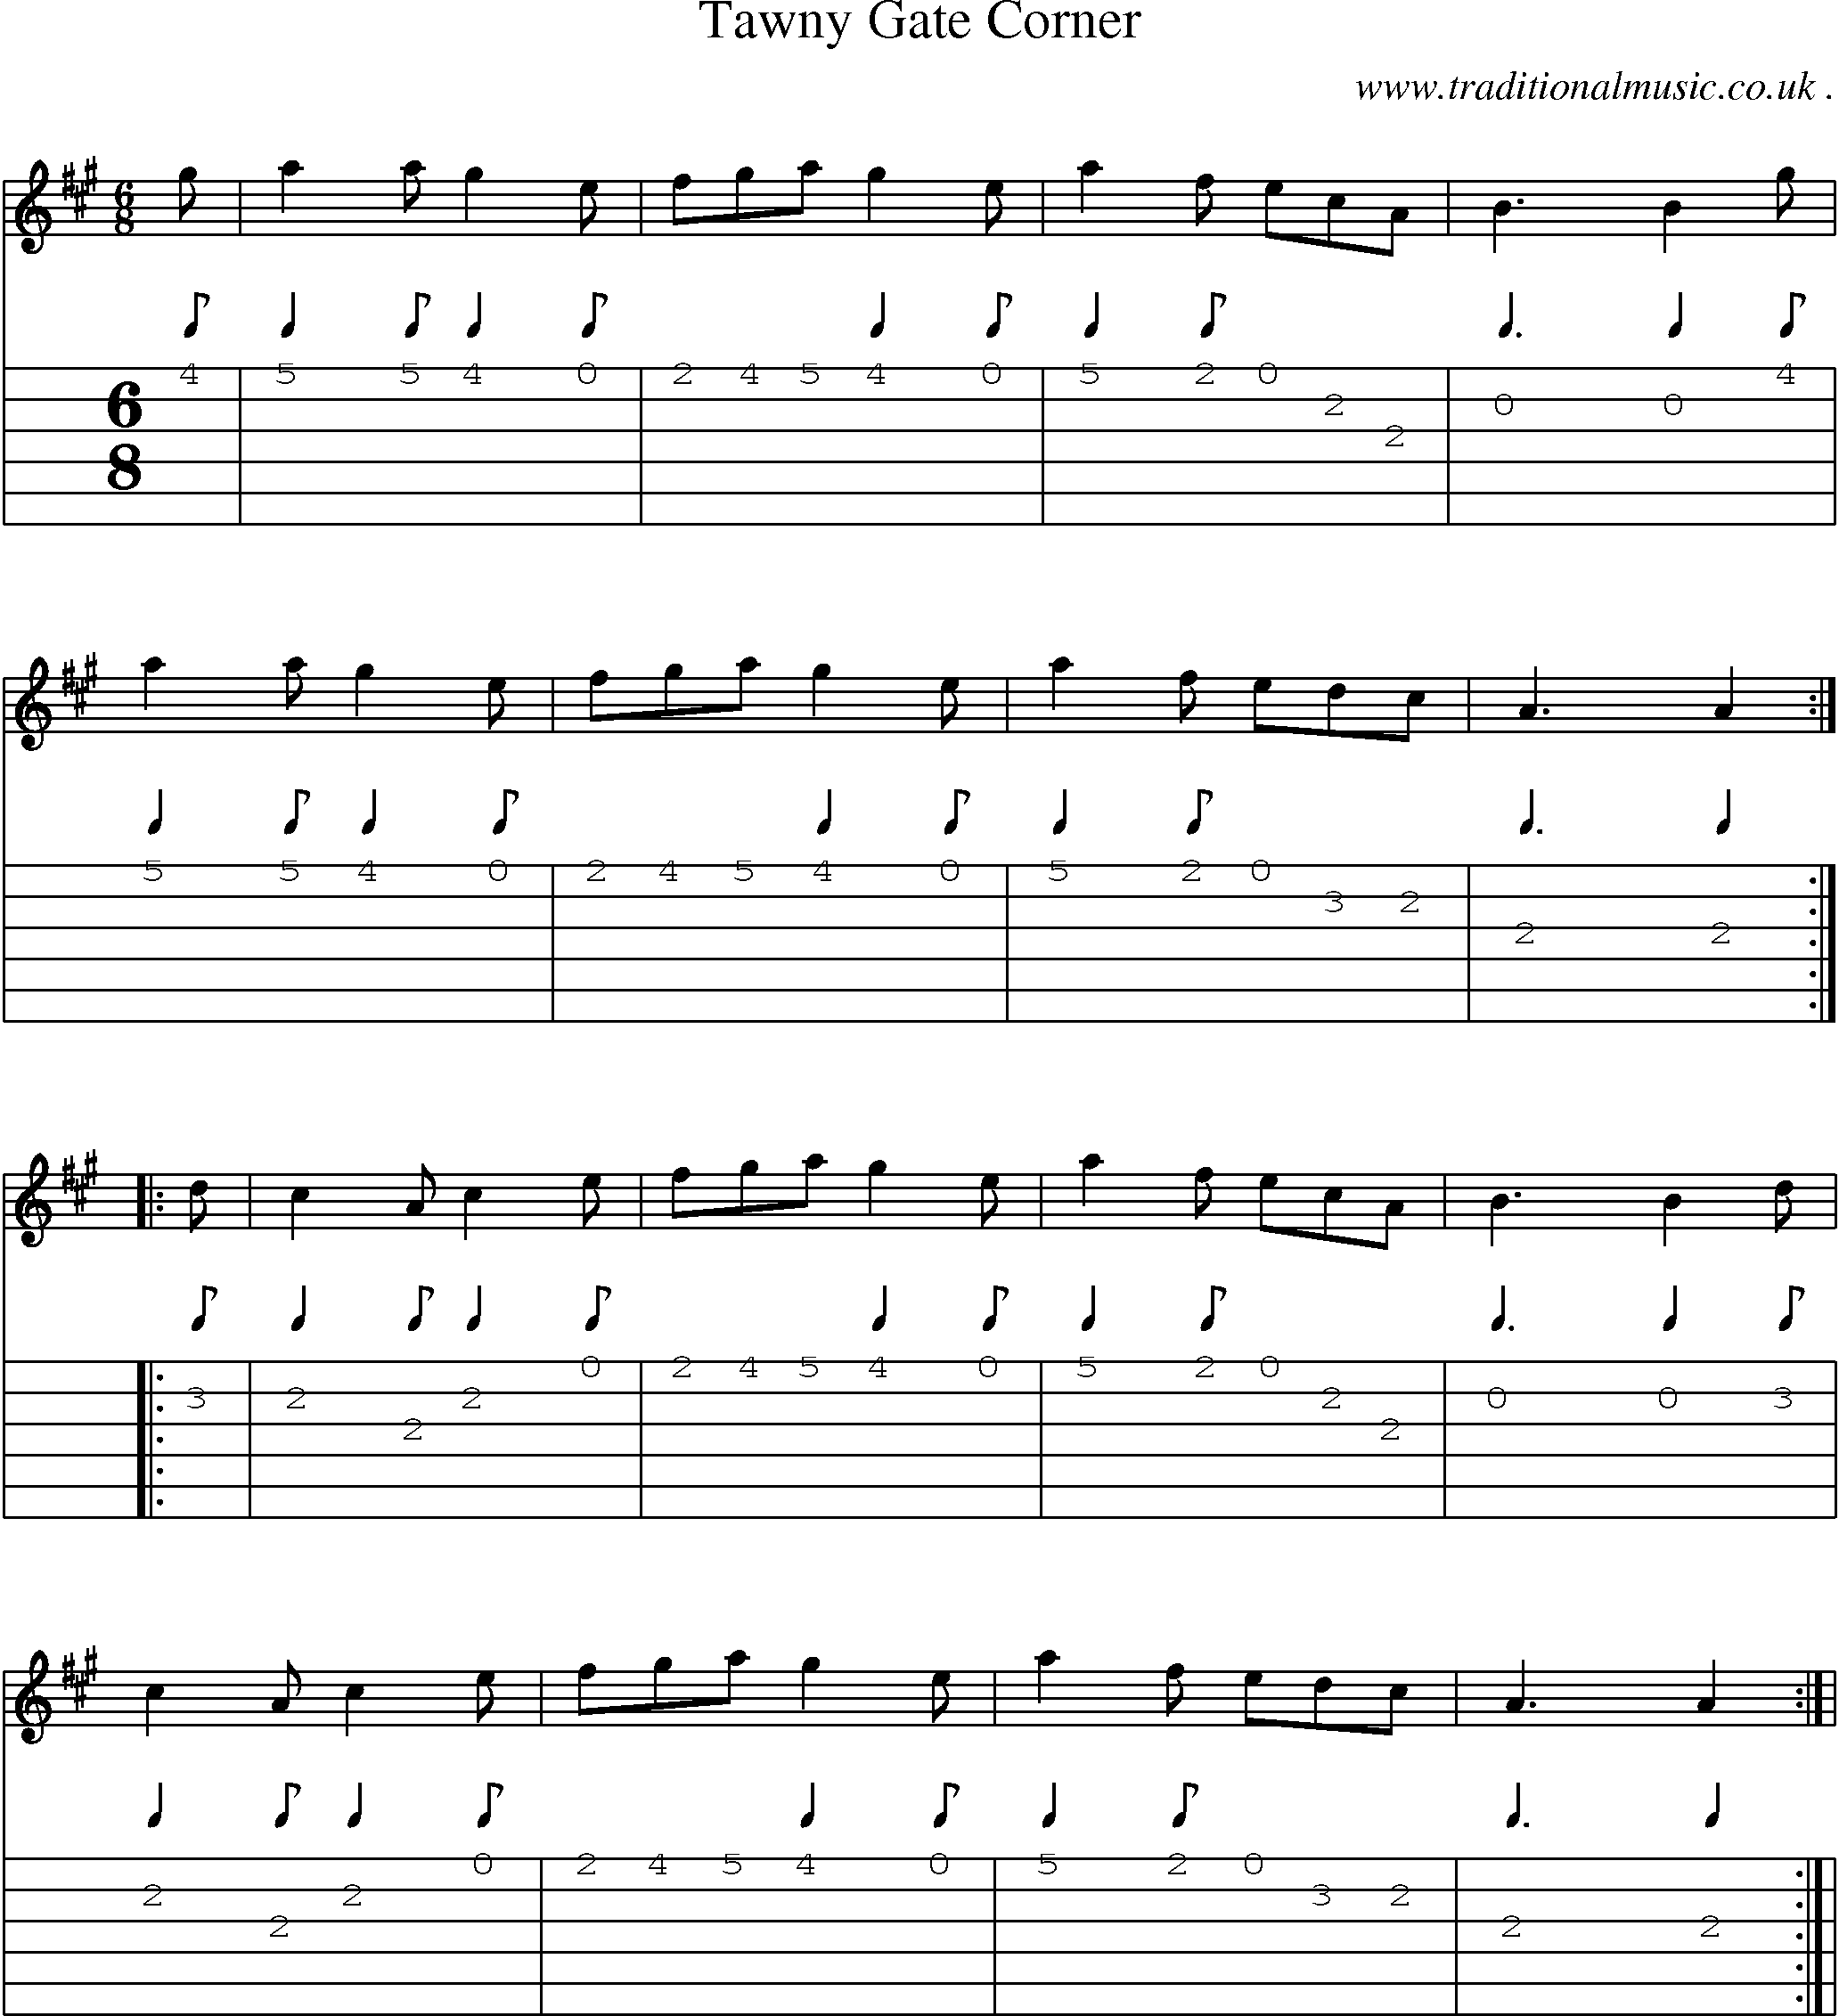 Sheet-Music and Guitar Tabs for Tawny Gate Corner